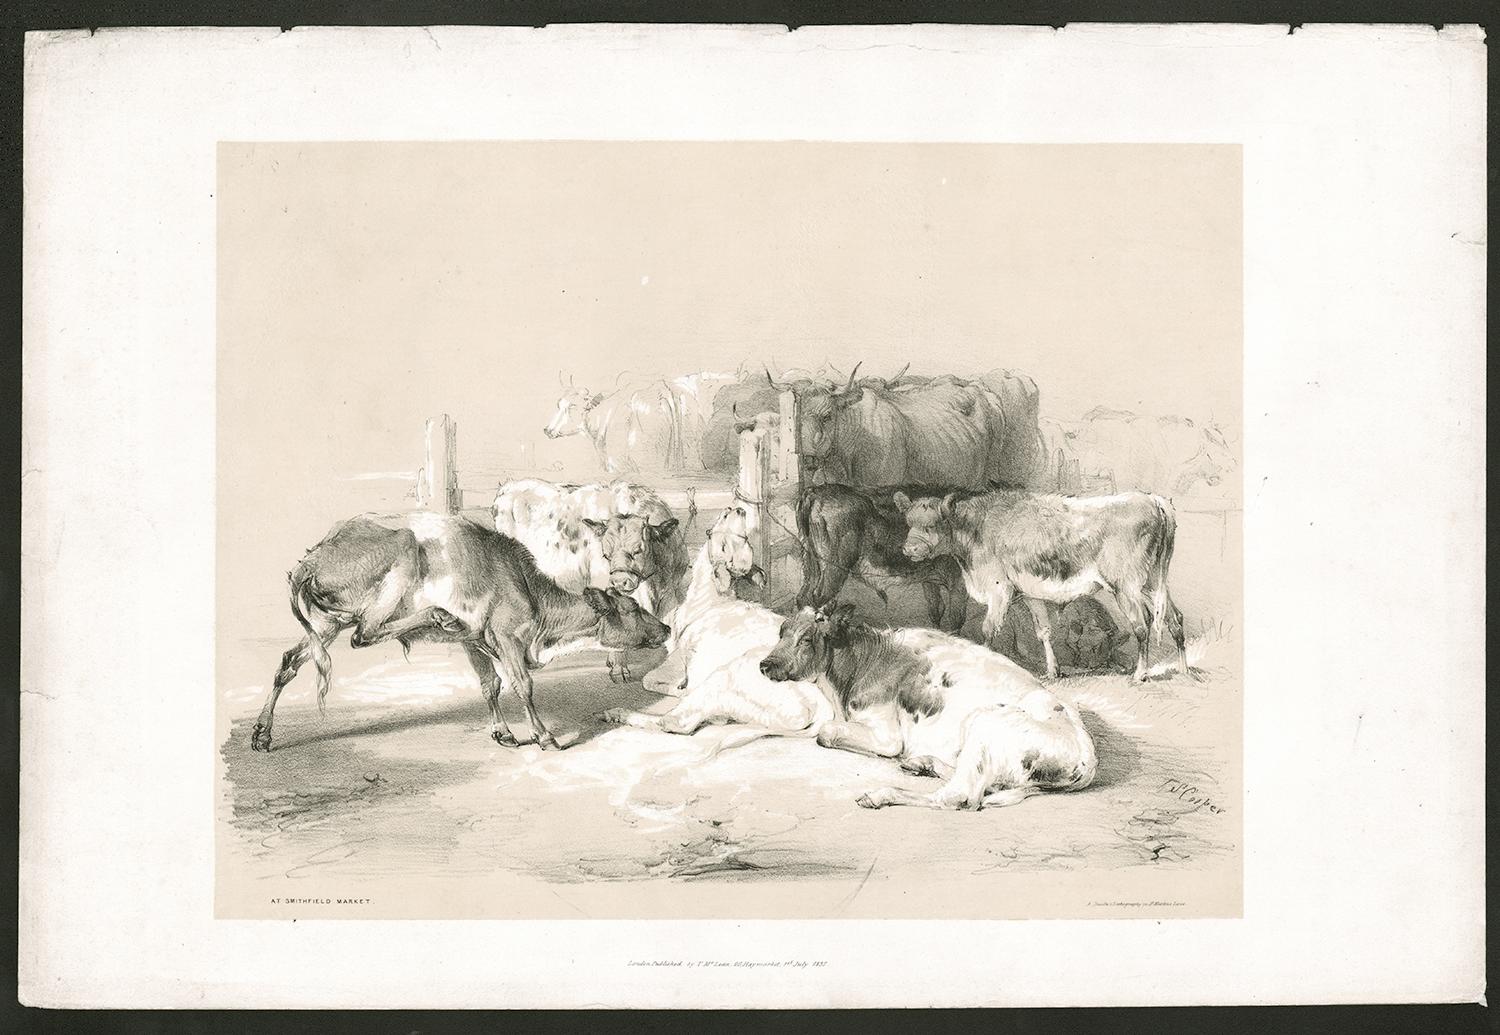 At Smithfield Market, tinted lithograph of cattle, by Thomas Sydney Cooper, 1837 - Print by Thomas Sidney Cooper